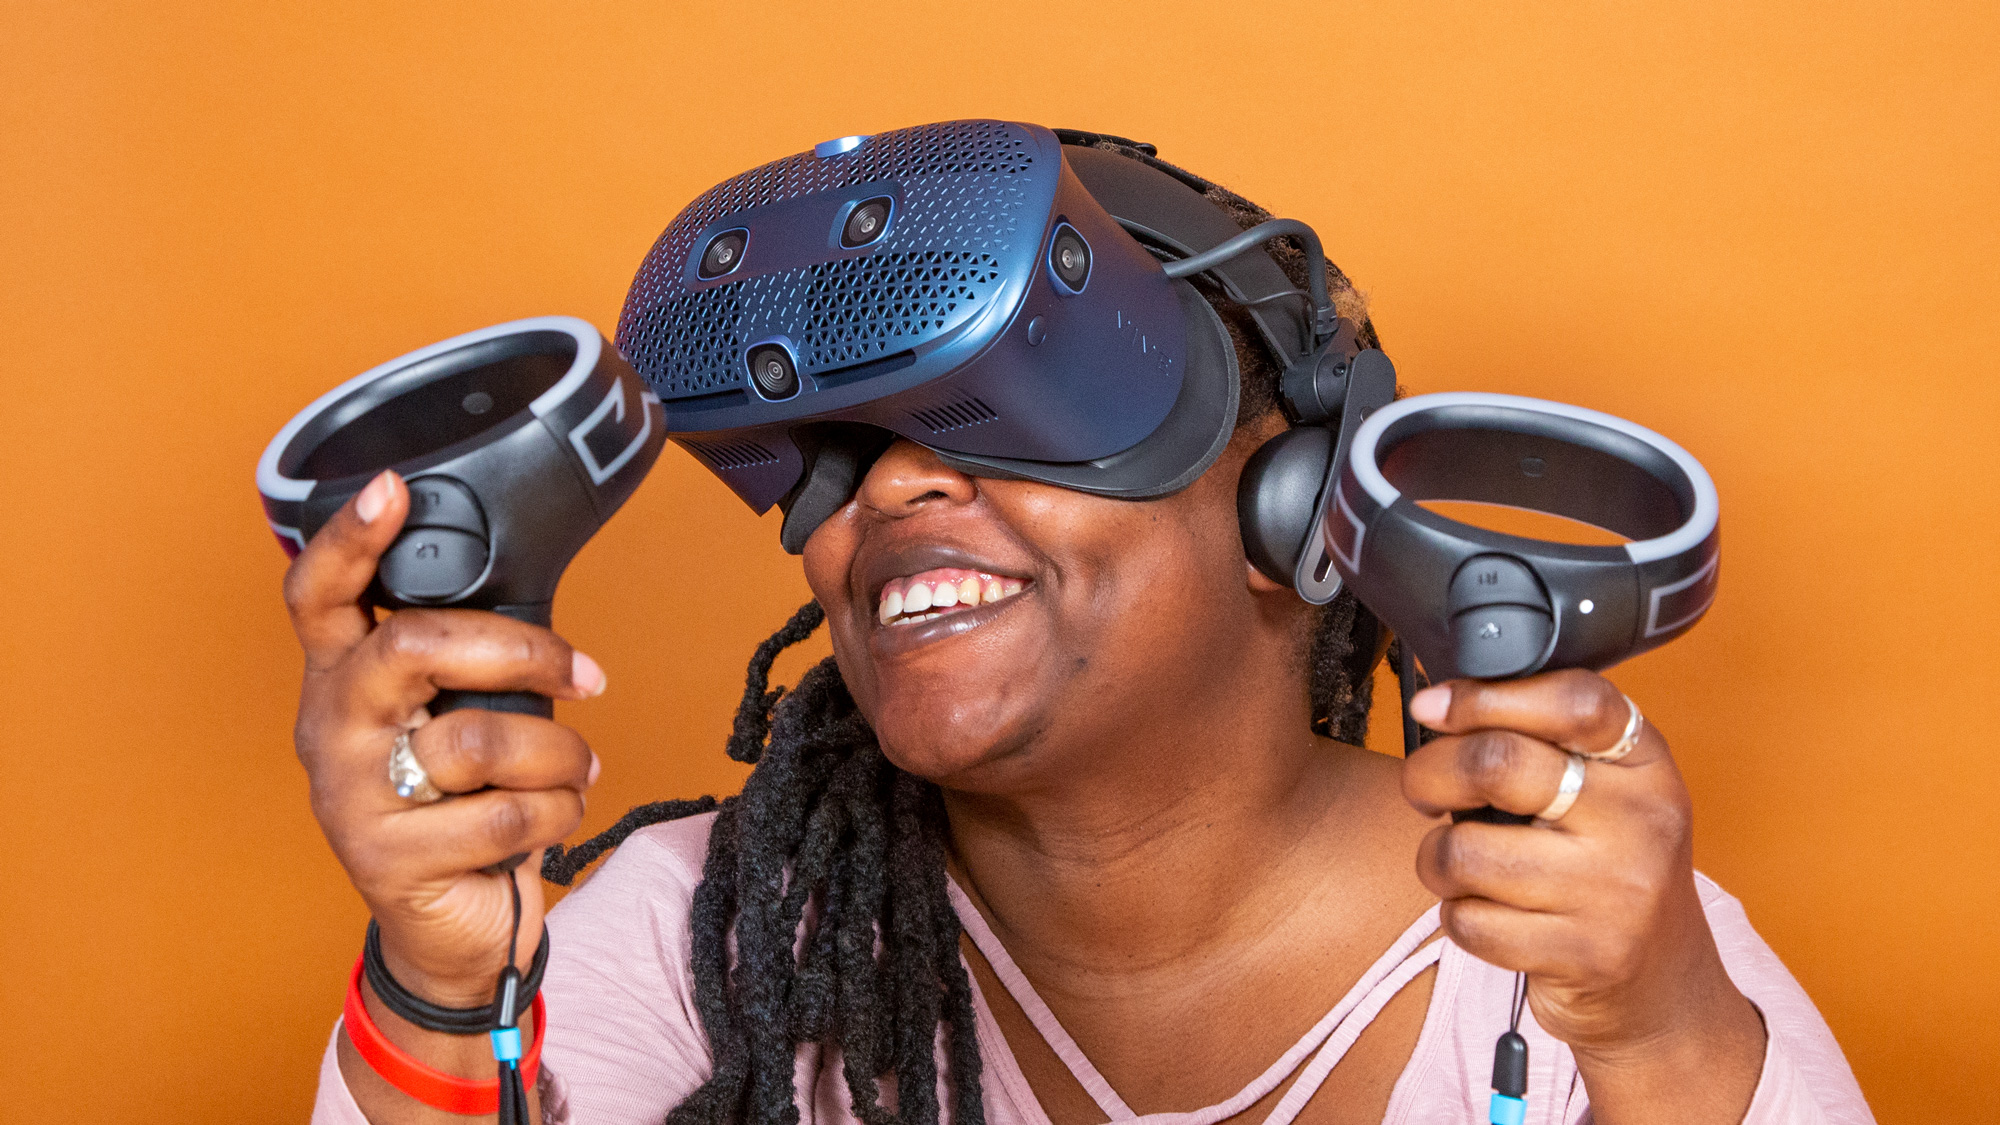 HTC Vive Cosmos review | Laptop Mag